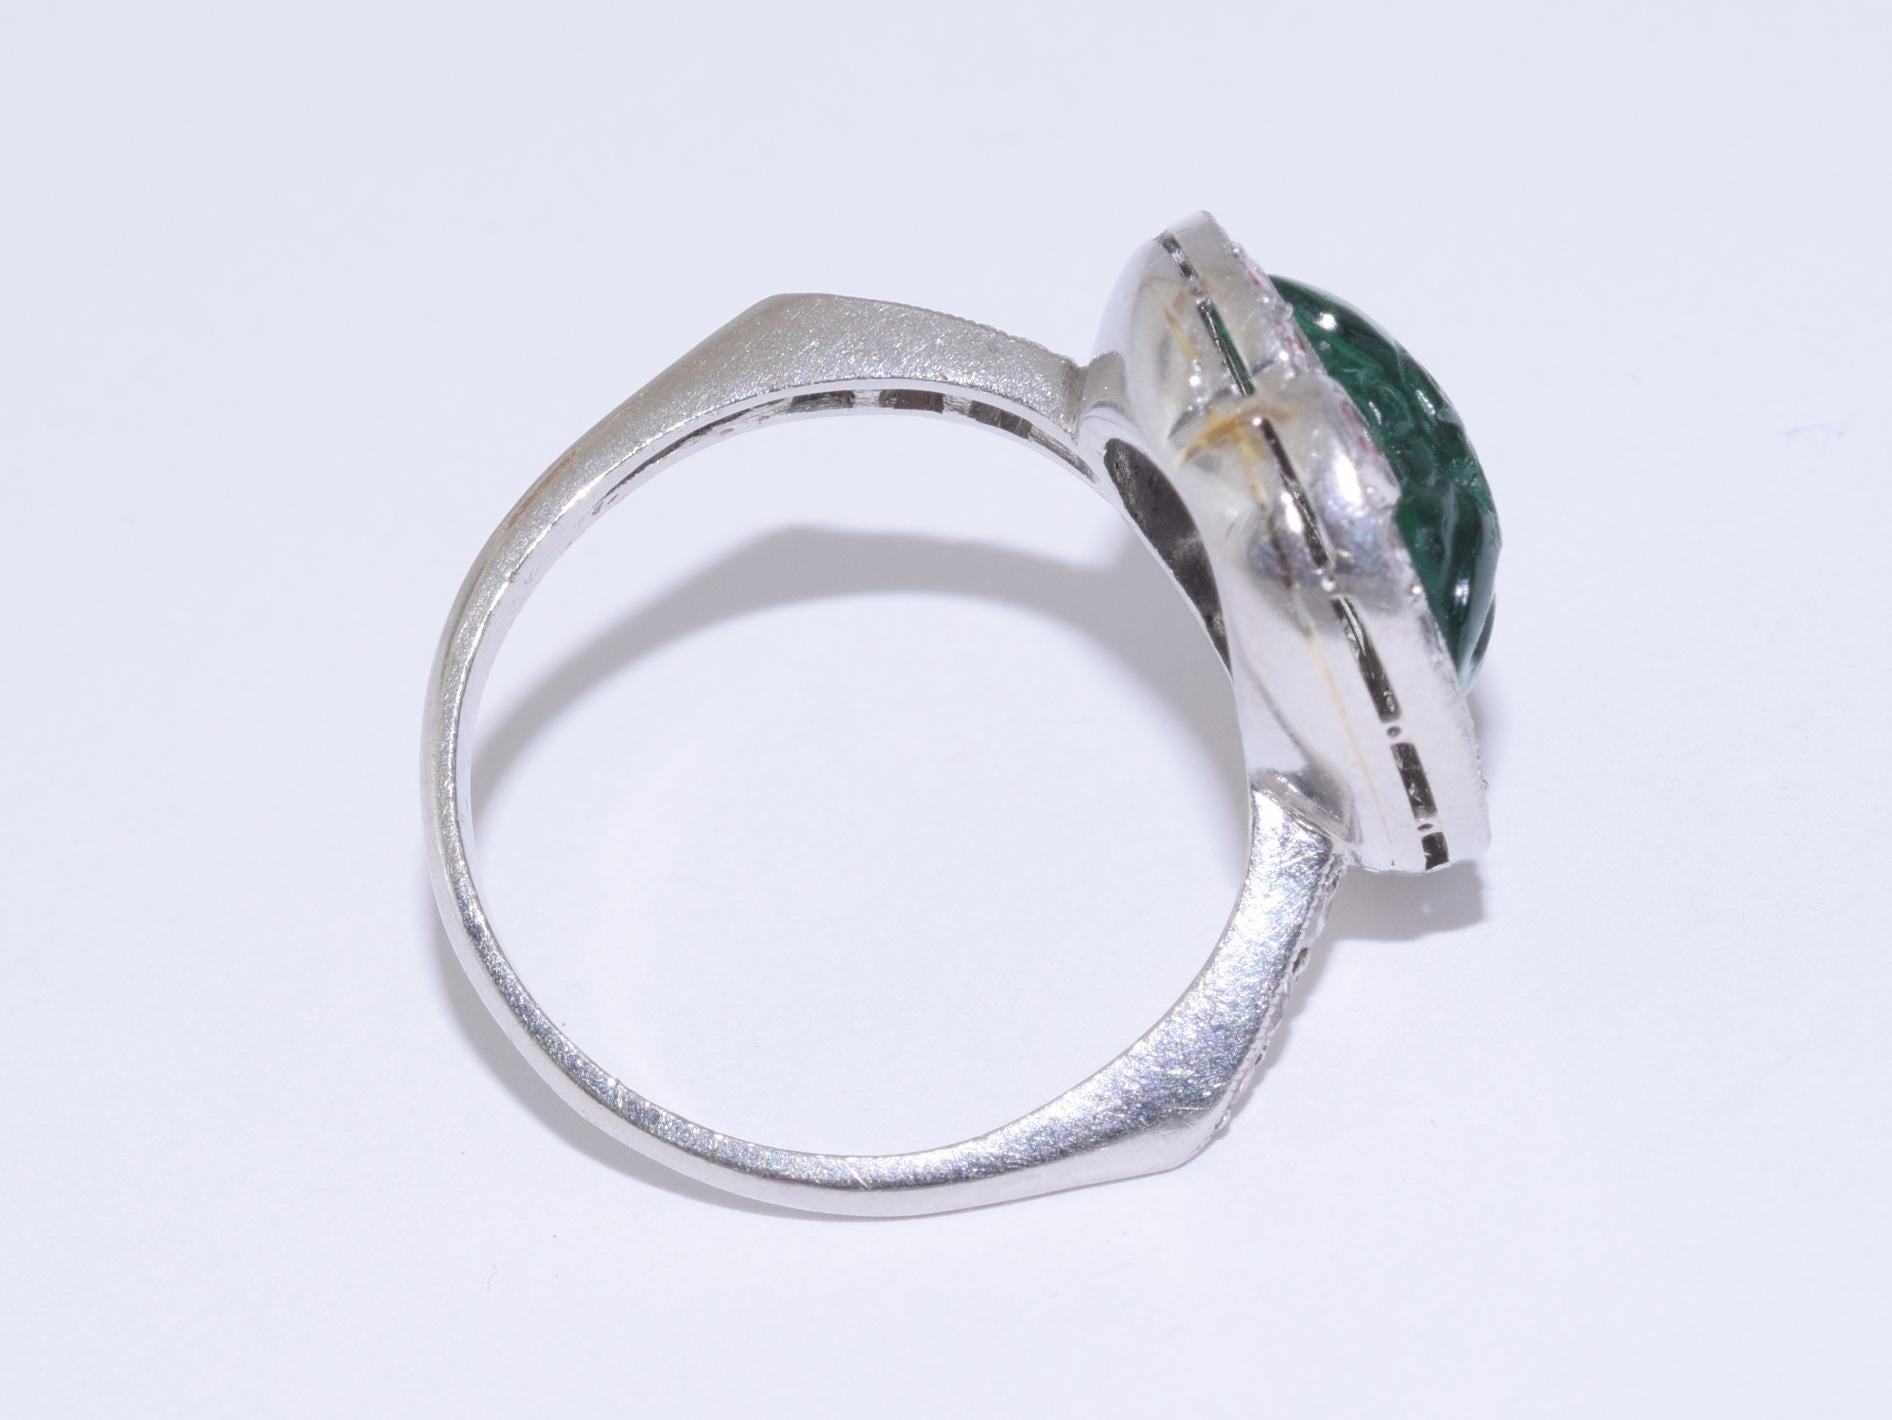 Women's Art Deco Carved Emerald and Diamond Ring